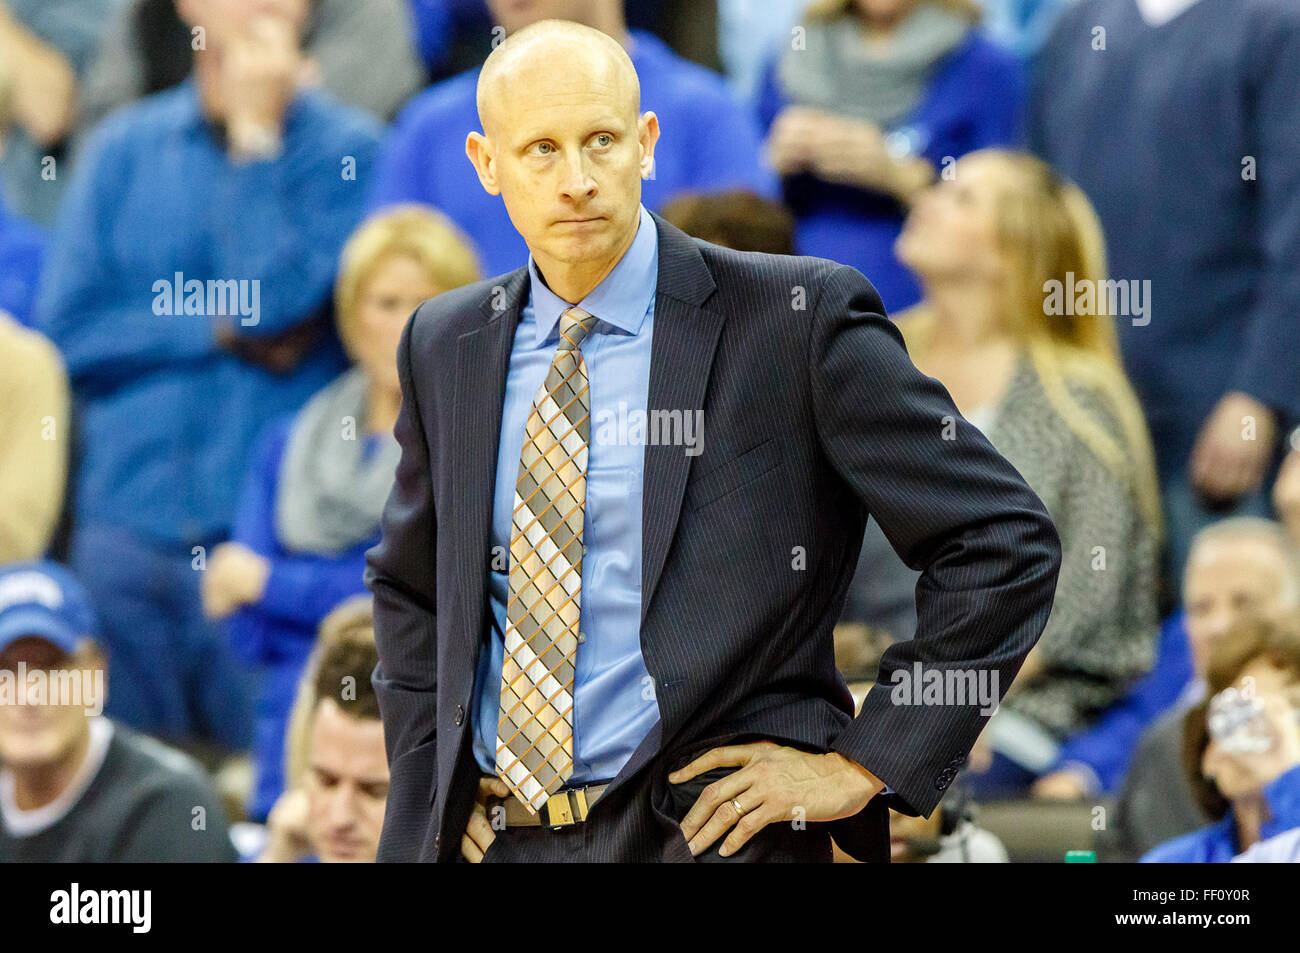 Omaha, NE USA. 09th Feb, 2016. Xavier Musketeers head coach Chris Mack late in 2nd half action during an NCAA men's basketball game between #5 Xavier Musketeers and Creighton Bluejays at CenturyLink Center in Omaha, NE.Attendance: 17,071.Creighton won 70-56.Michael Spomer/Cal Sport Media/Alamy Live News Stock Photo